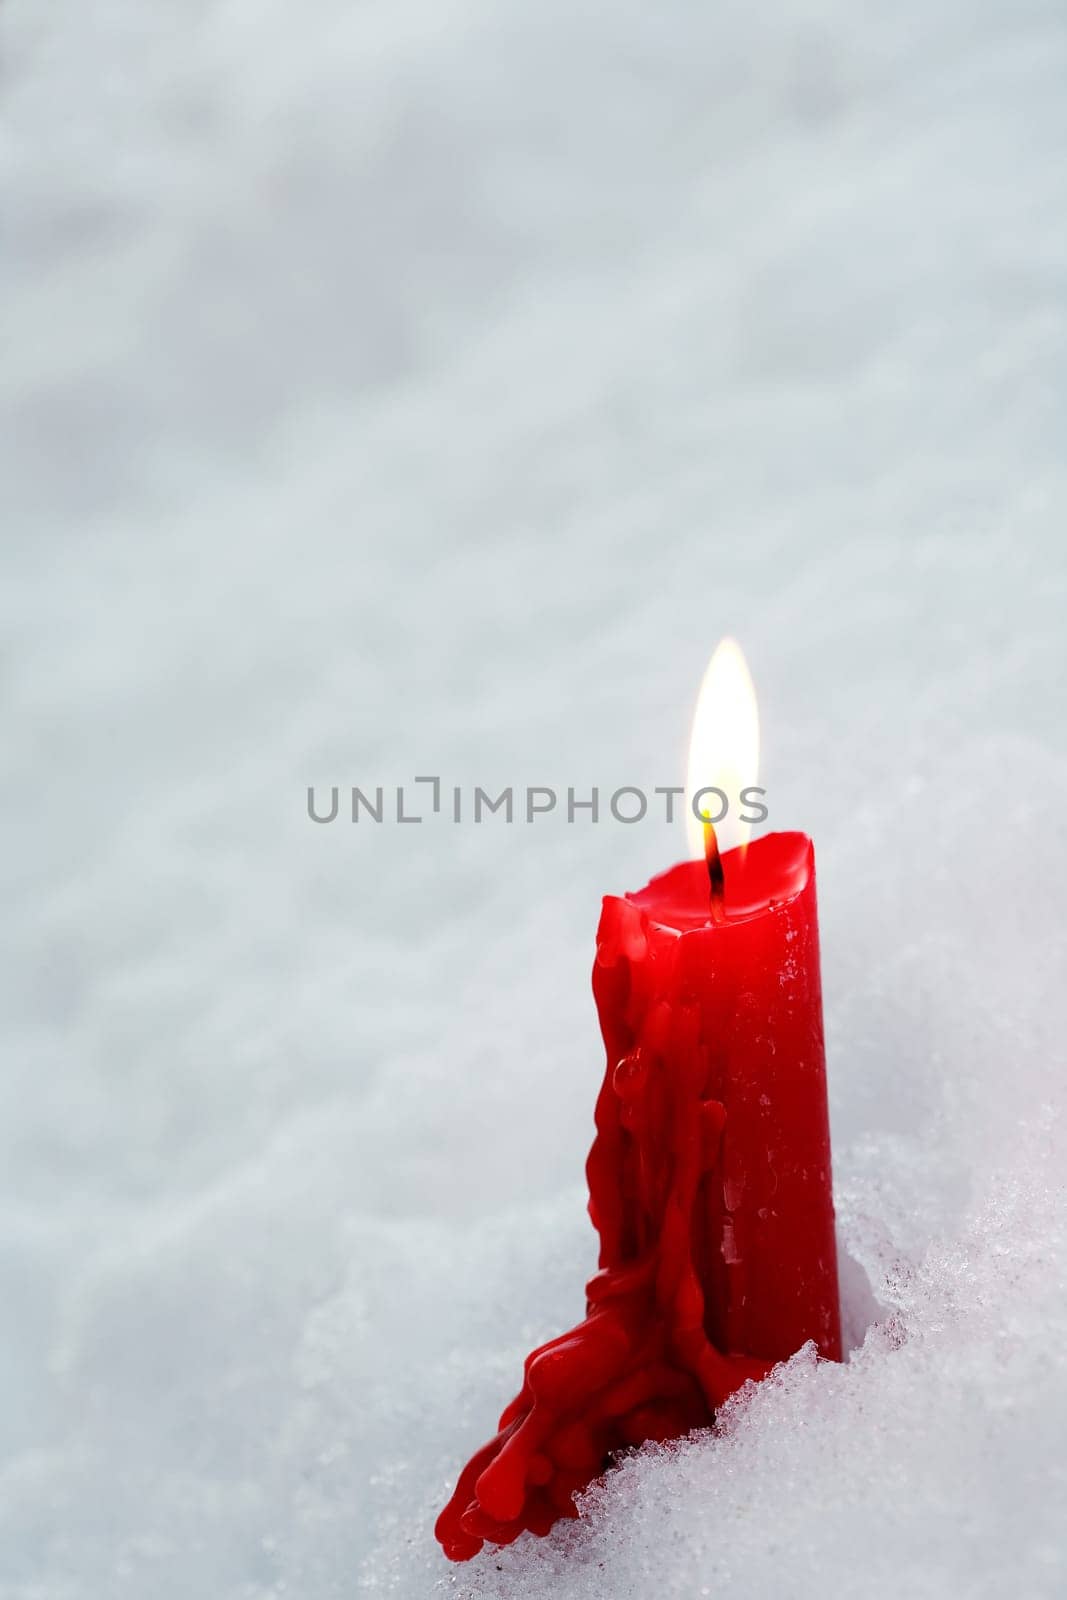 A symbol of memory. A single candle burns in the snow